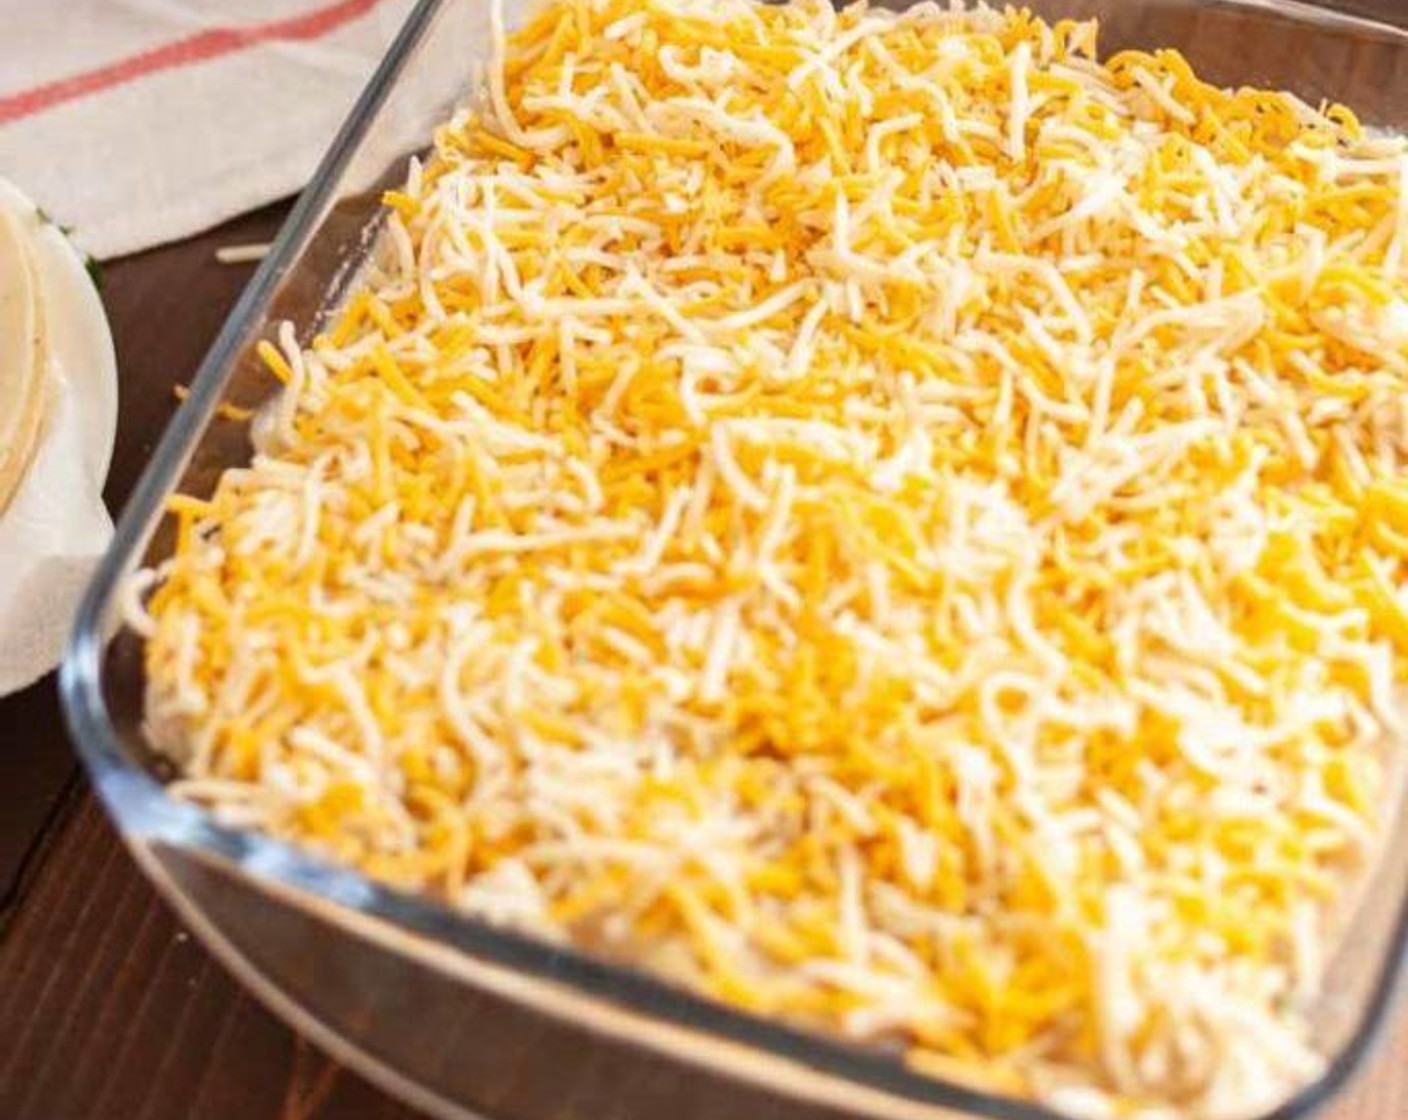 step 7 Spread any remaining enchilada sauce over the top of the enchiladas. Sprinkle with the Shredded Cheese (1 cup).